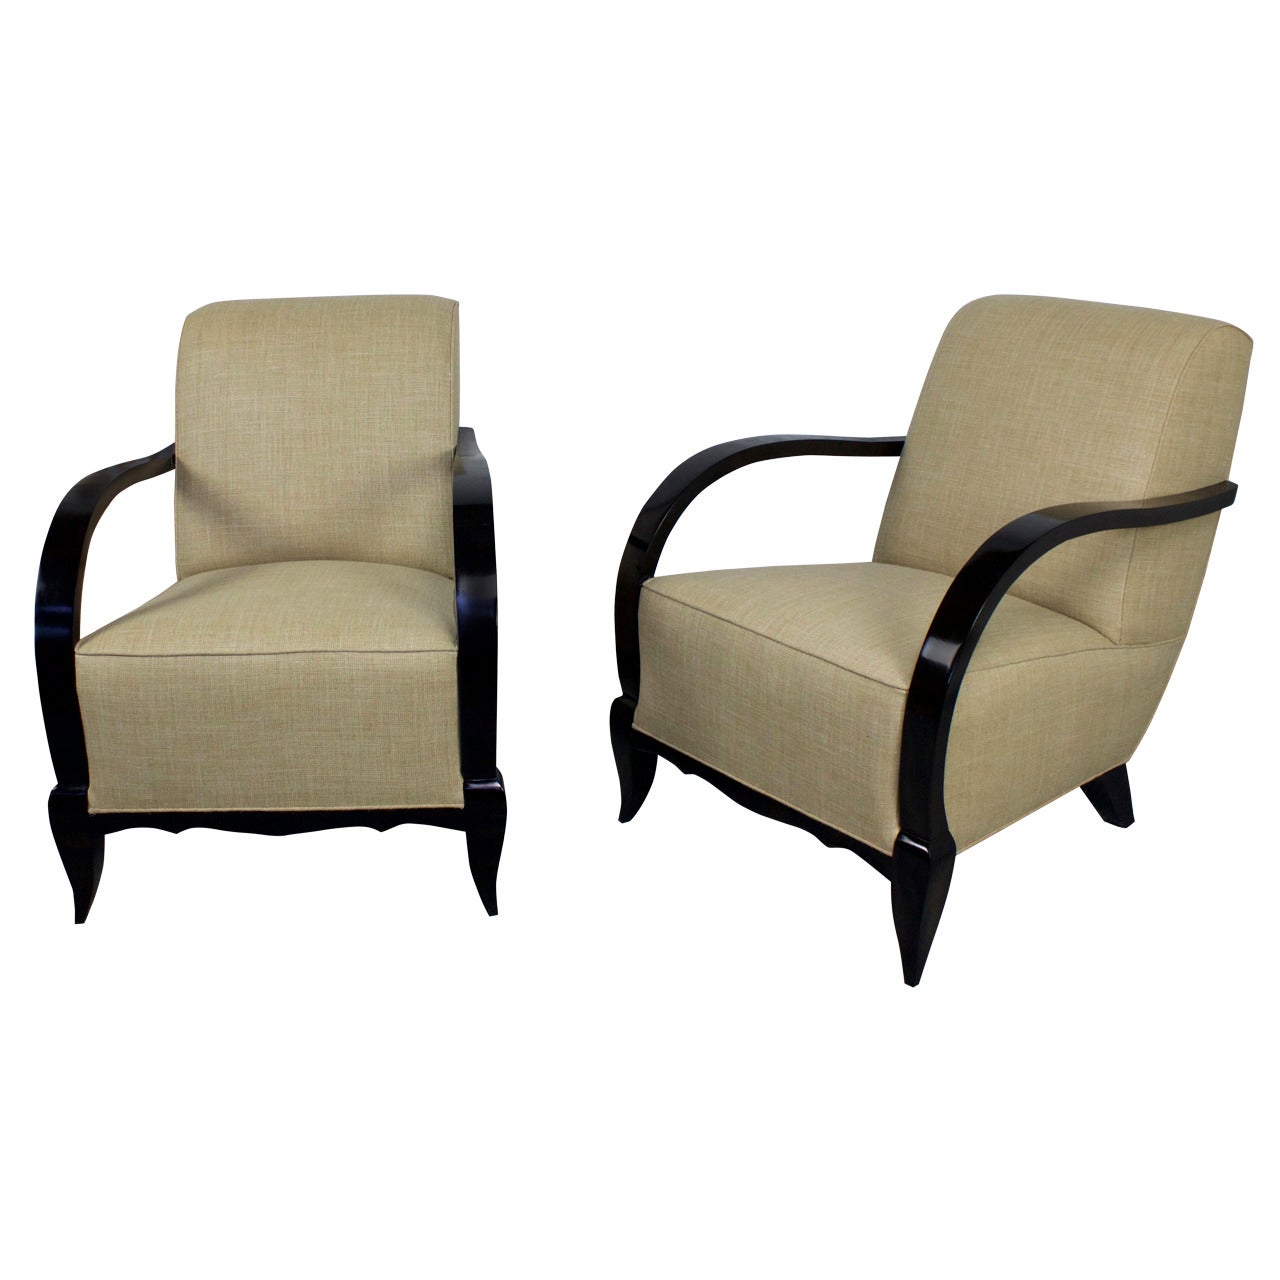 Pair of French Armchairs, 1940s